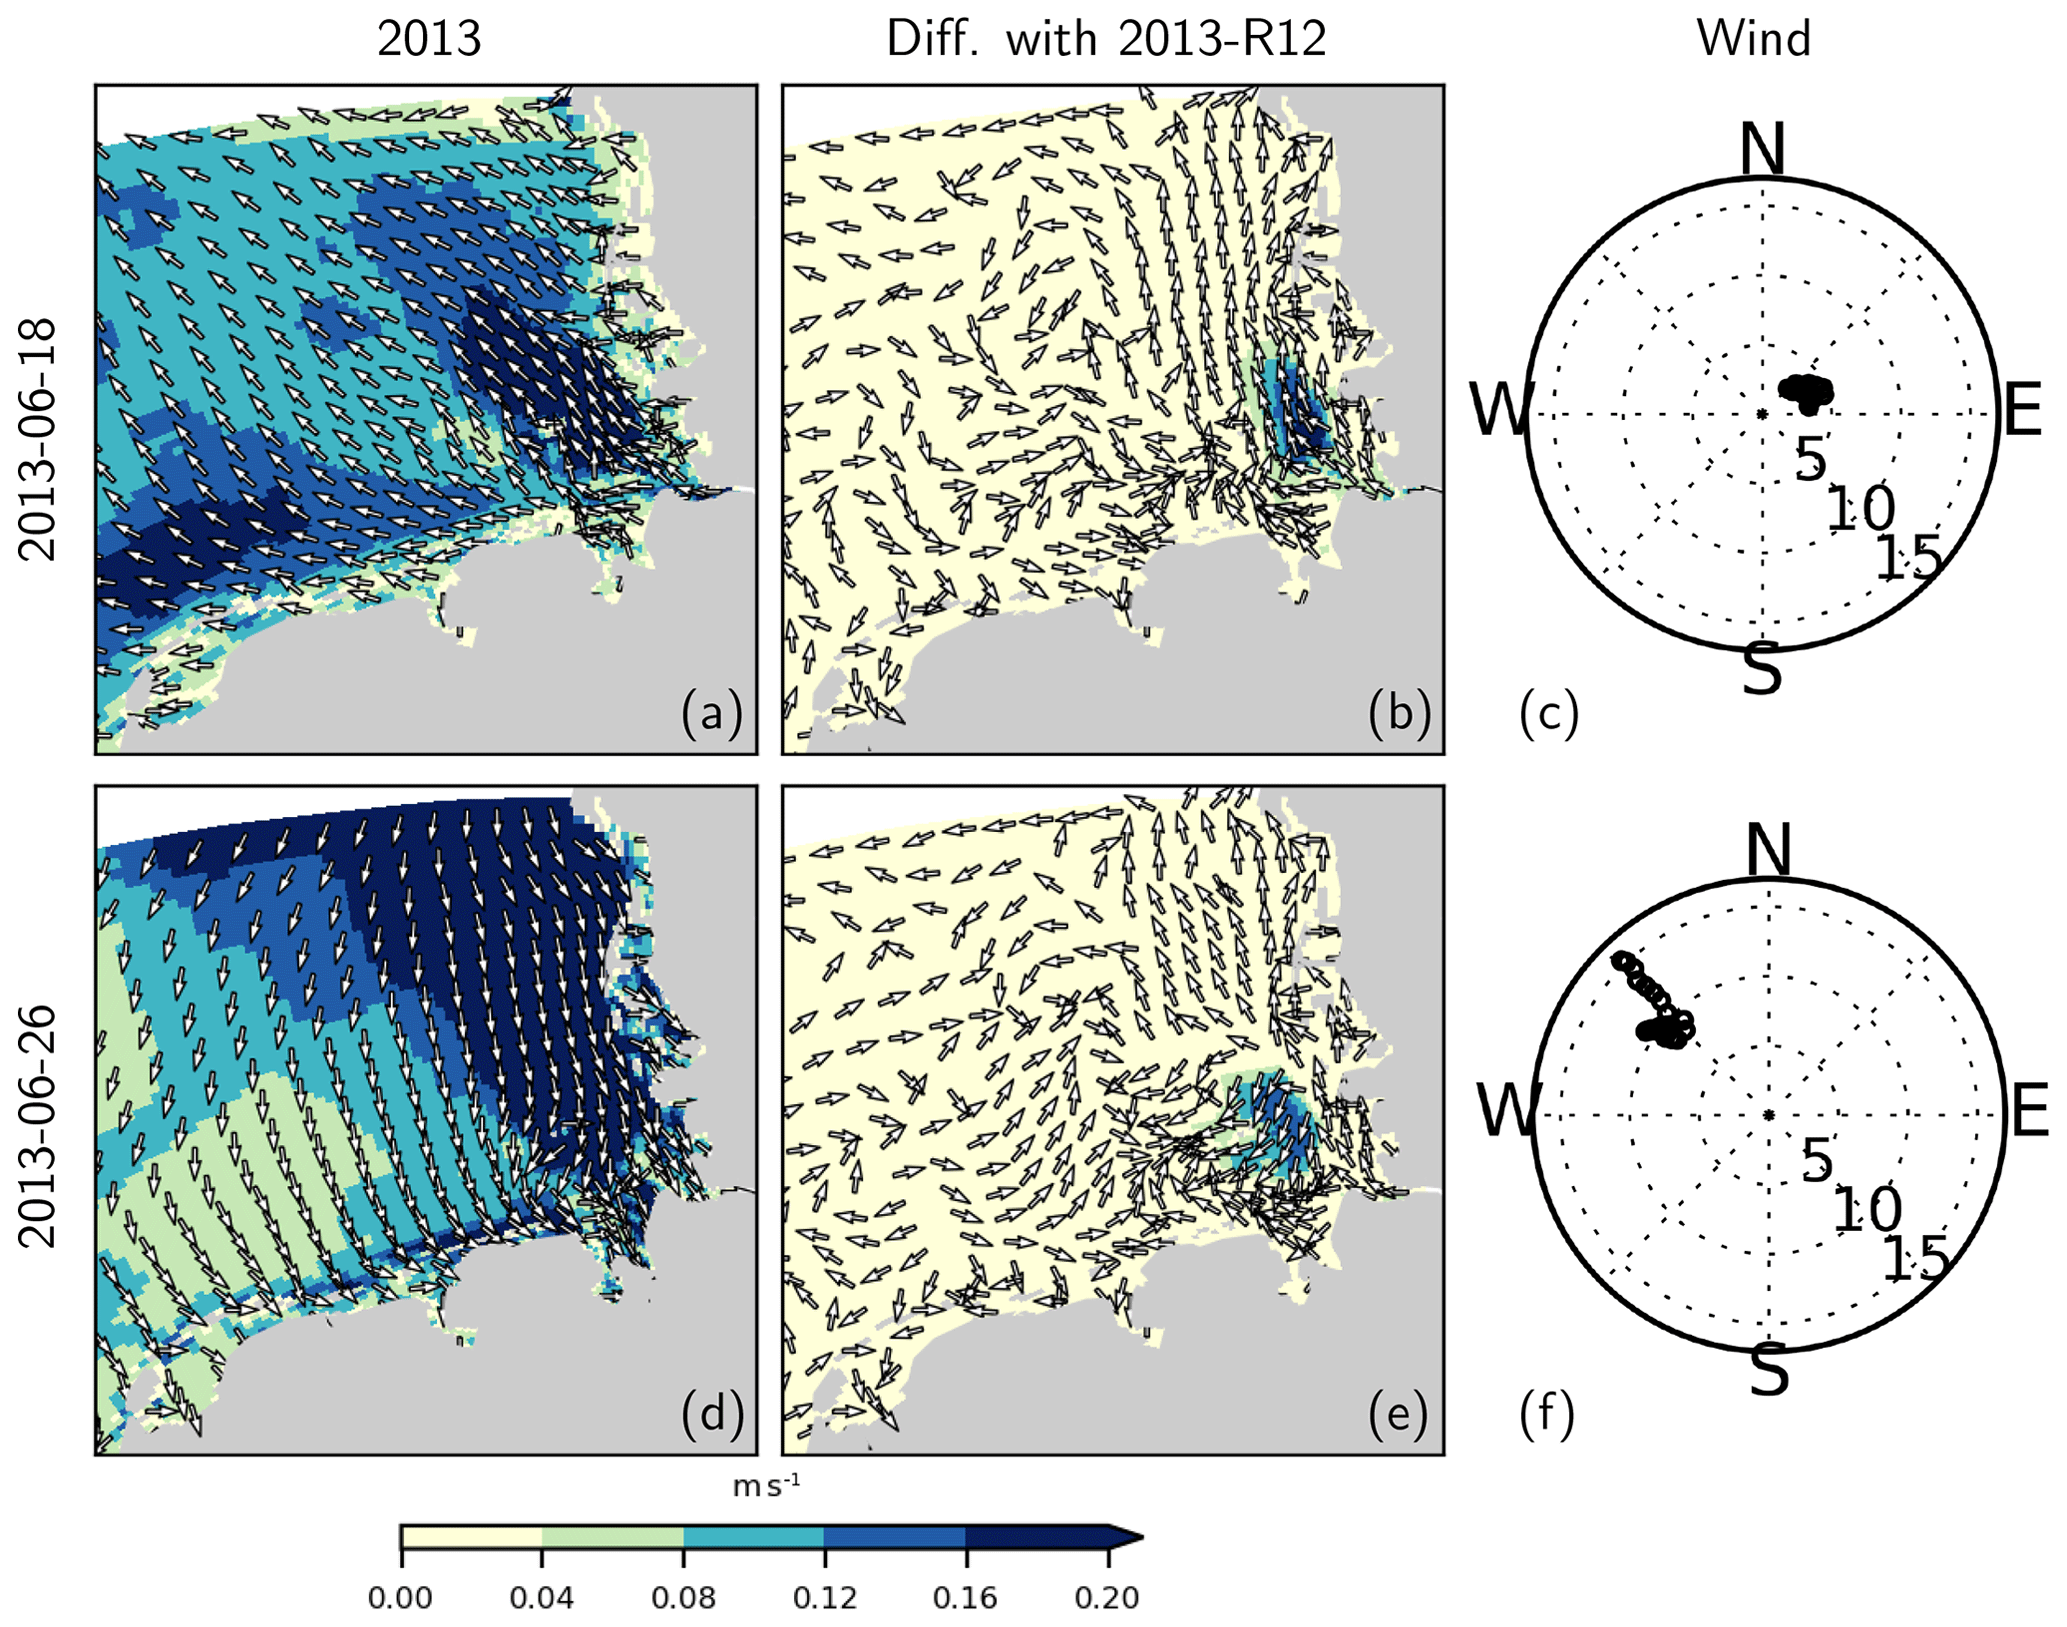 Bg Interactive Impacts Of Meteorological And Hydrological Conditions On The Physical And Biogeochemical Structure Of A Coastal System